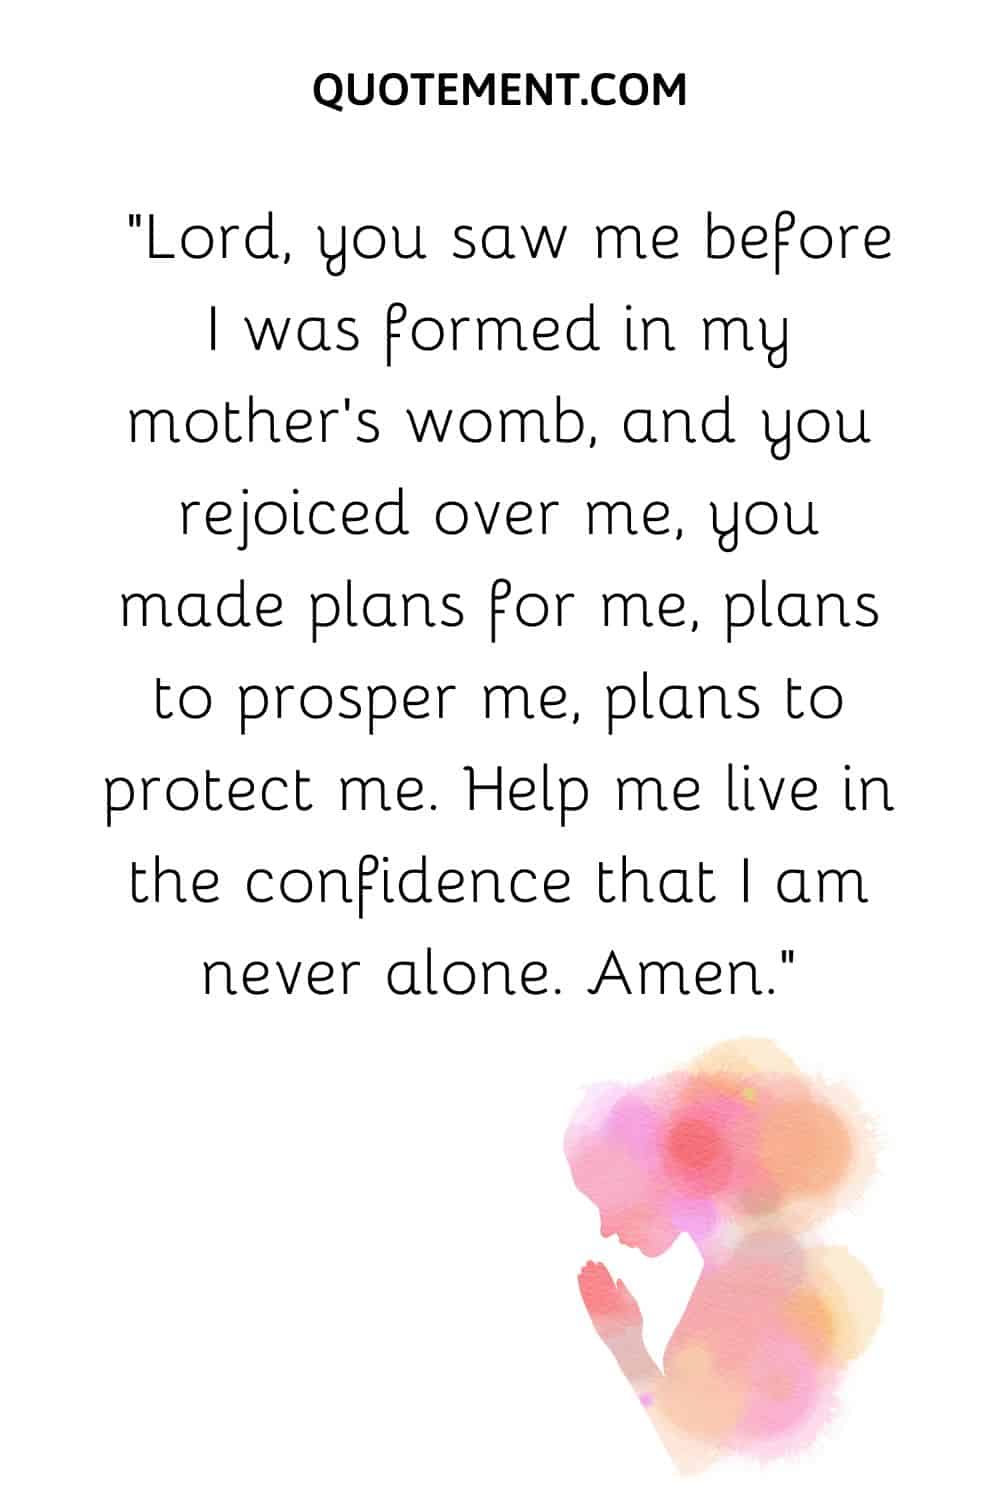 Lord, you saw me before I was formed in my mother’s womb, and you rejoiced over me, you made plans for me, plans to prosper me, plans to protect me